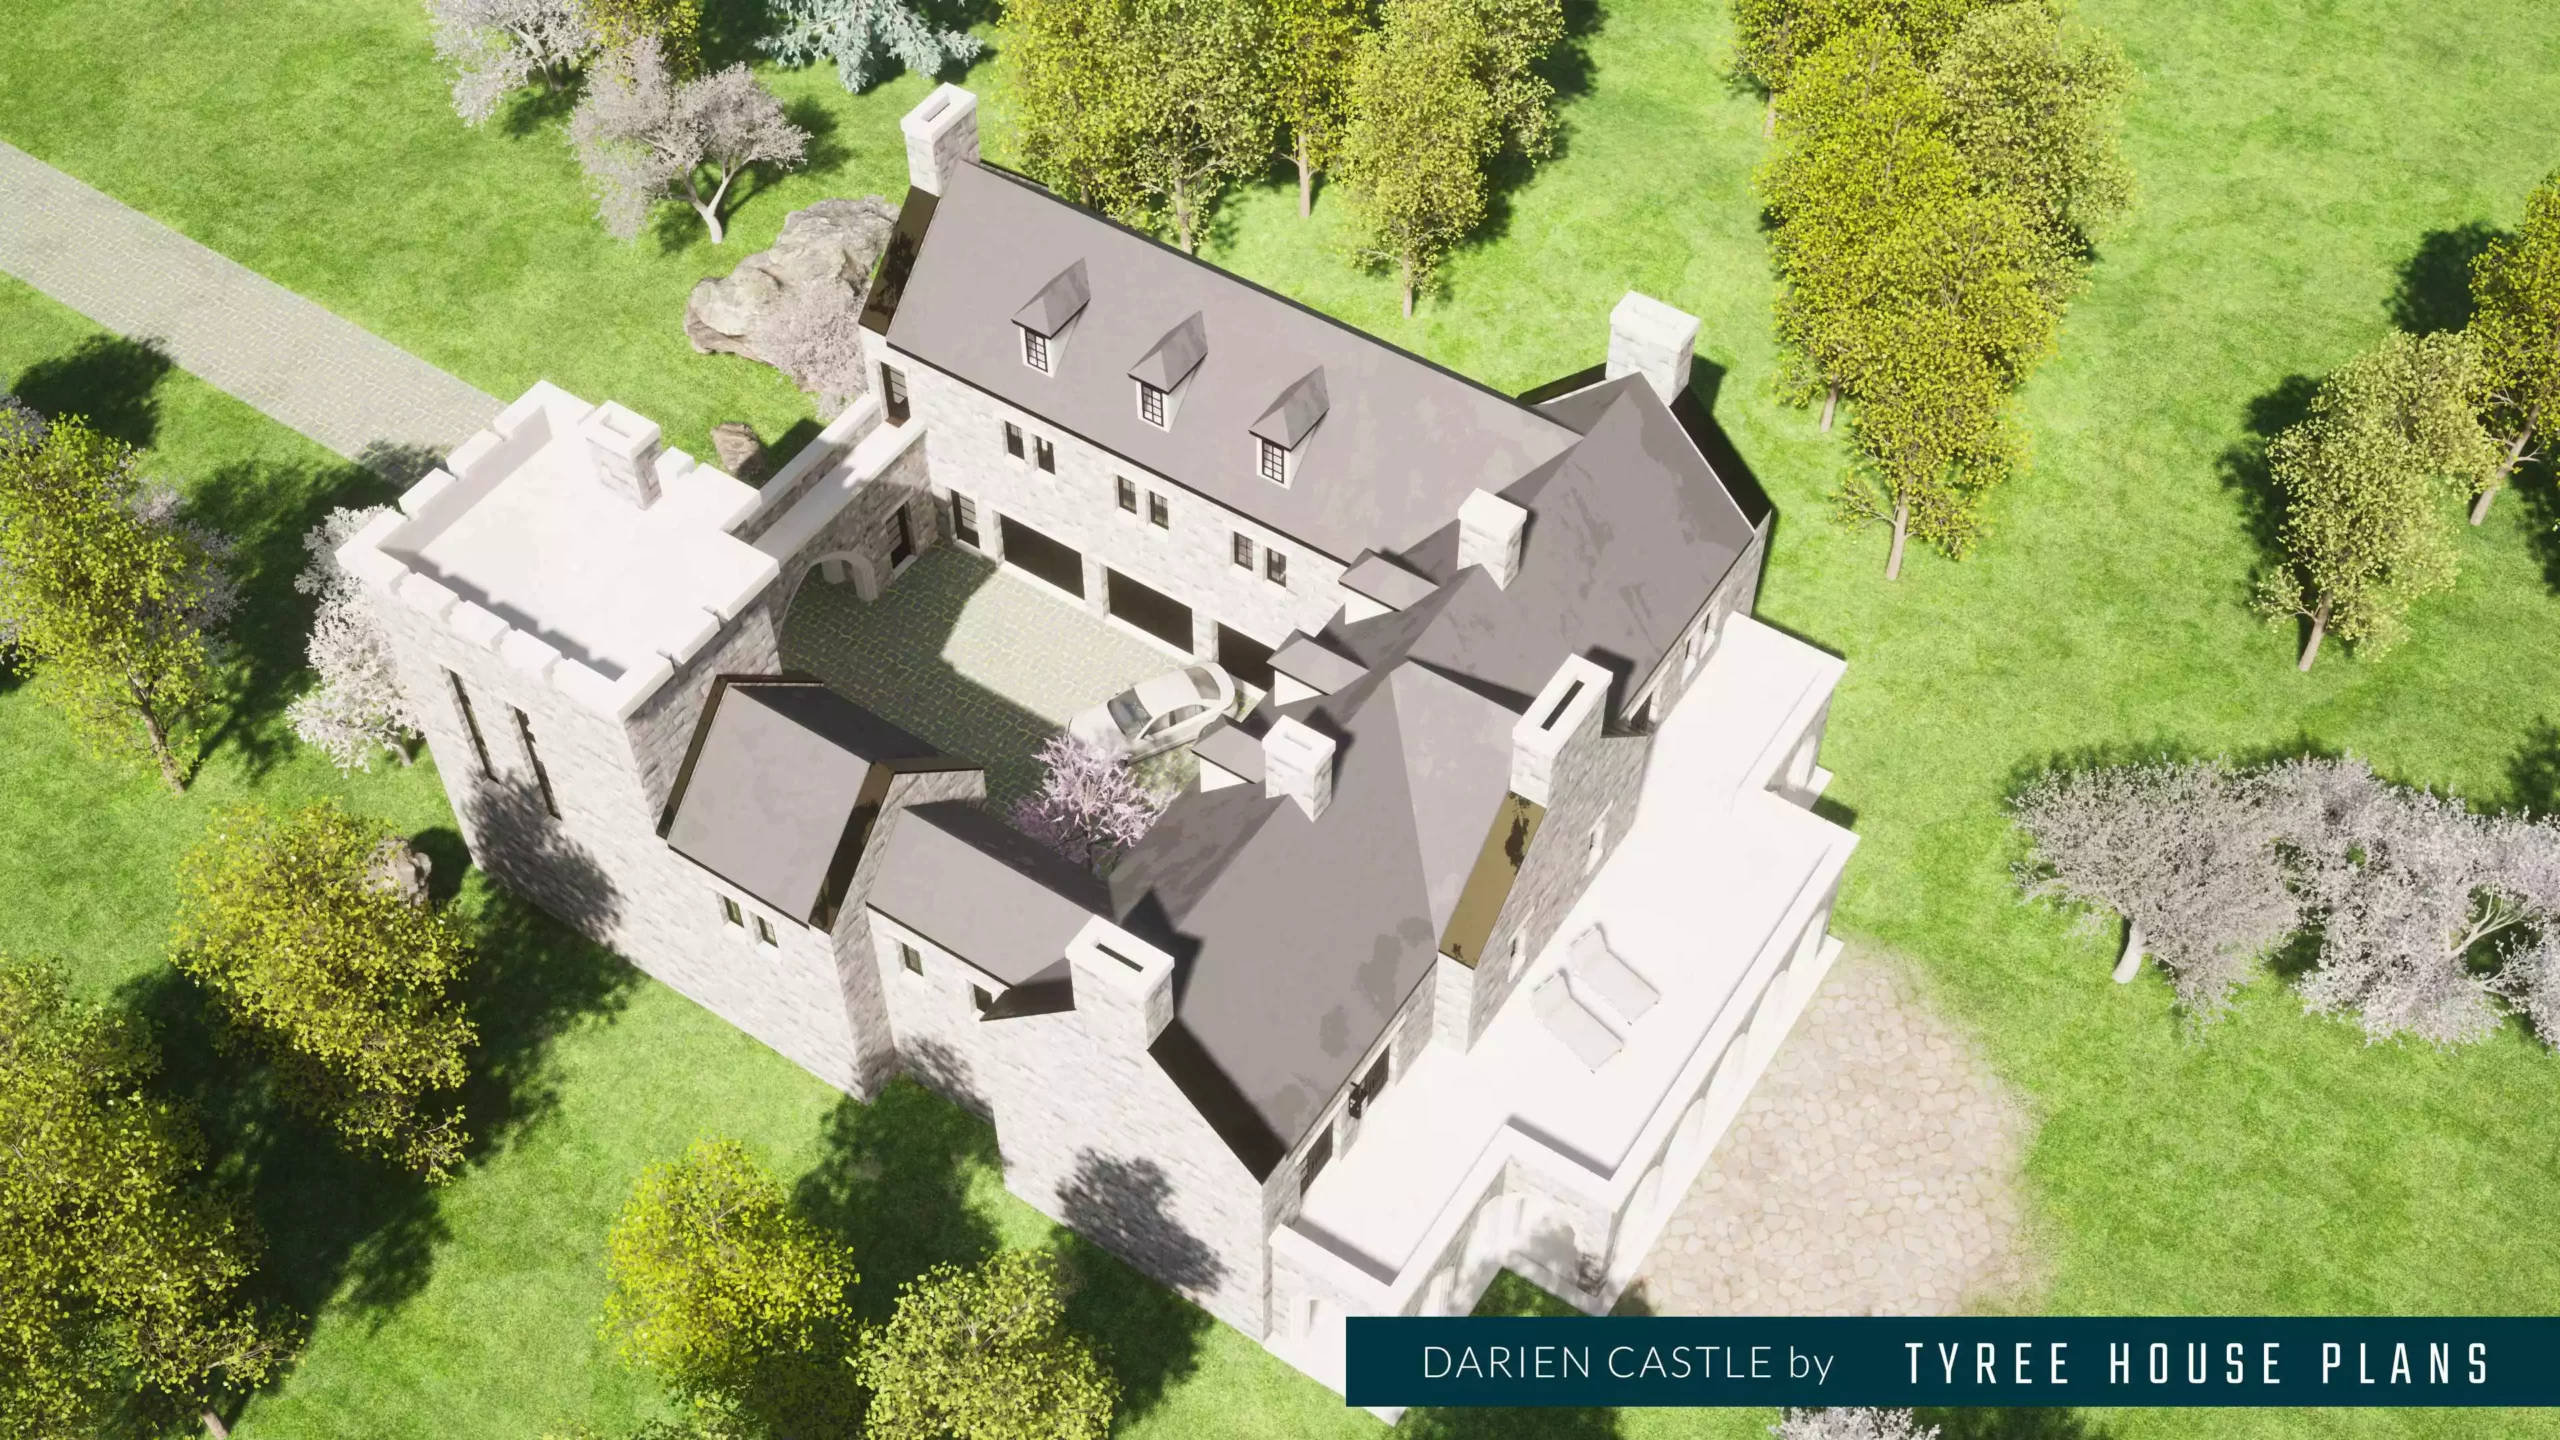 View from above. Darien Castle by Tyree House Plans.